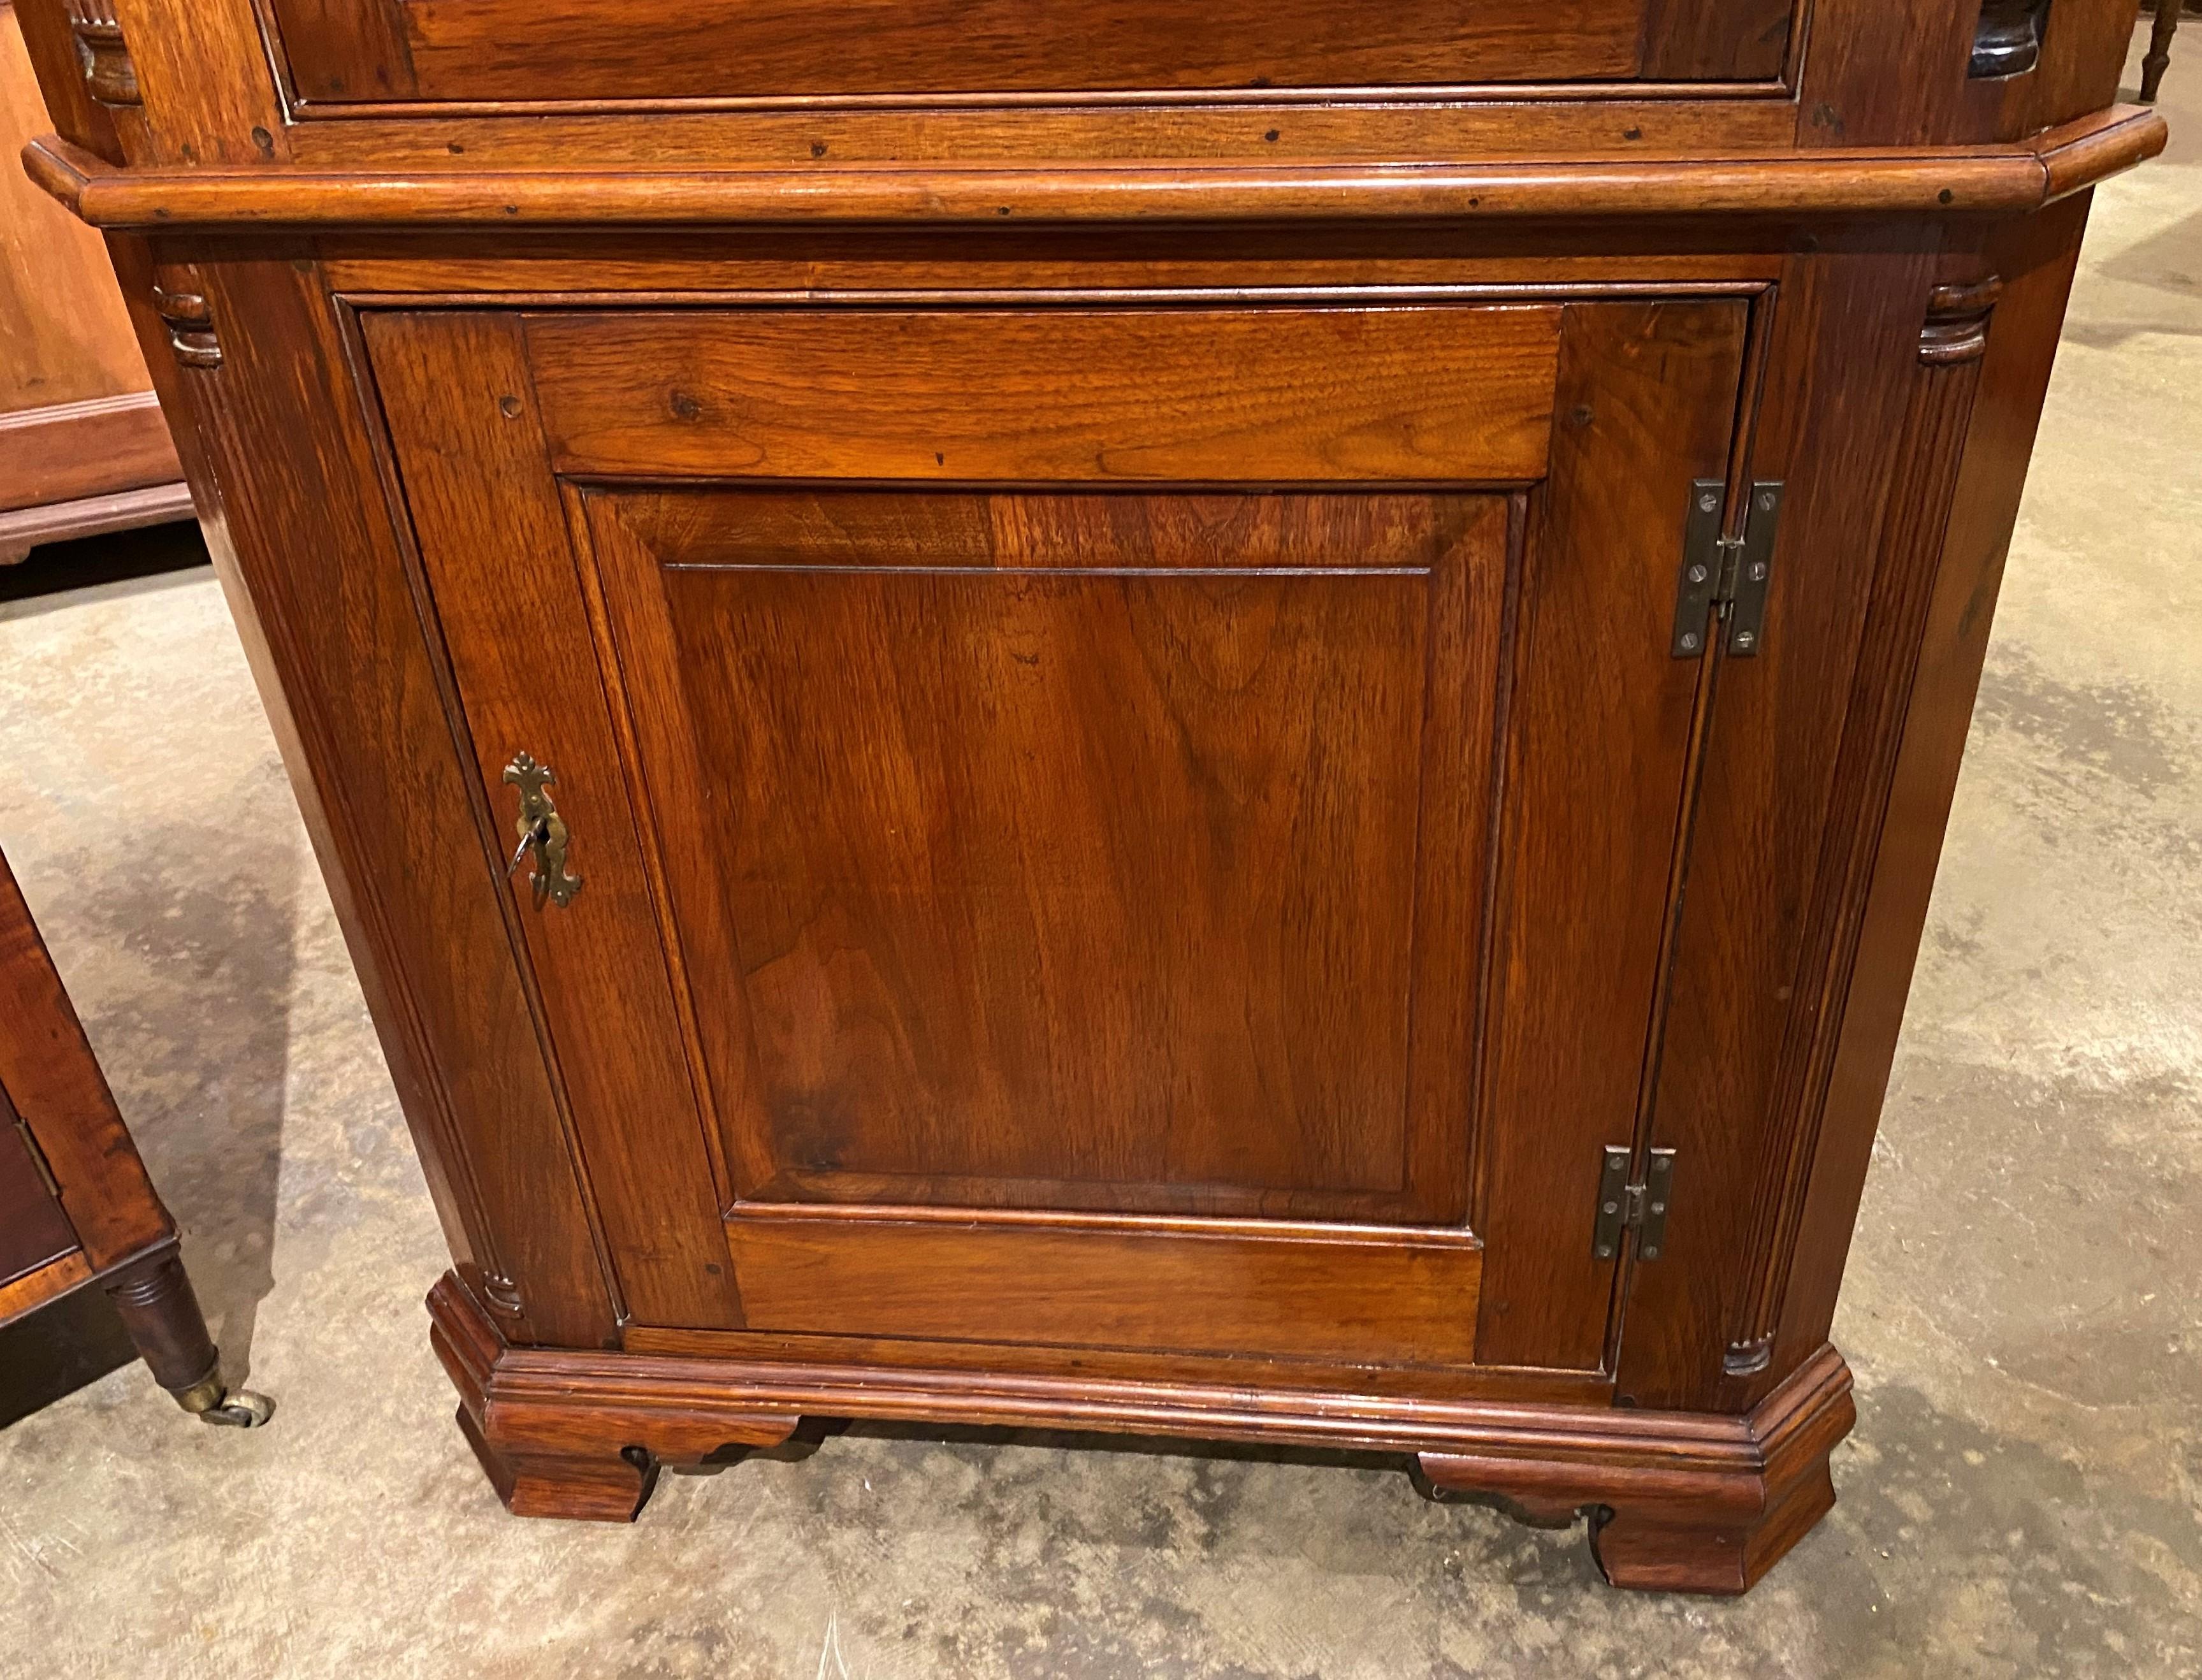 Hand-Carved Diminutive 19th Century Pennsylvania Two Part Cherry Corner Cupboard